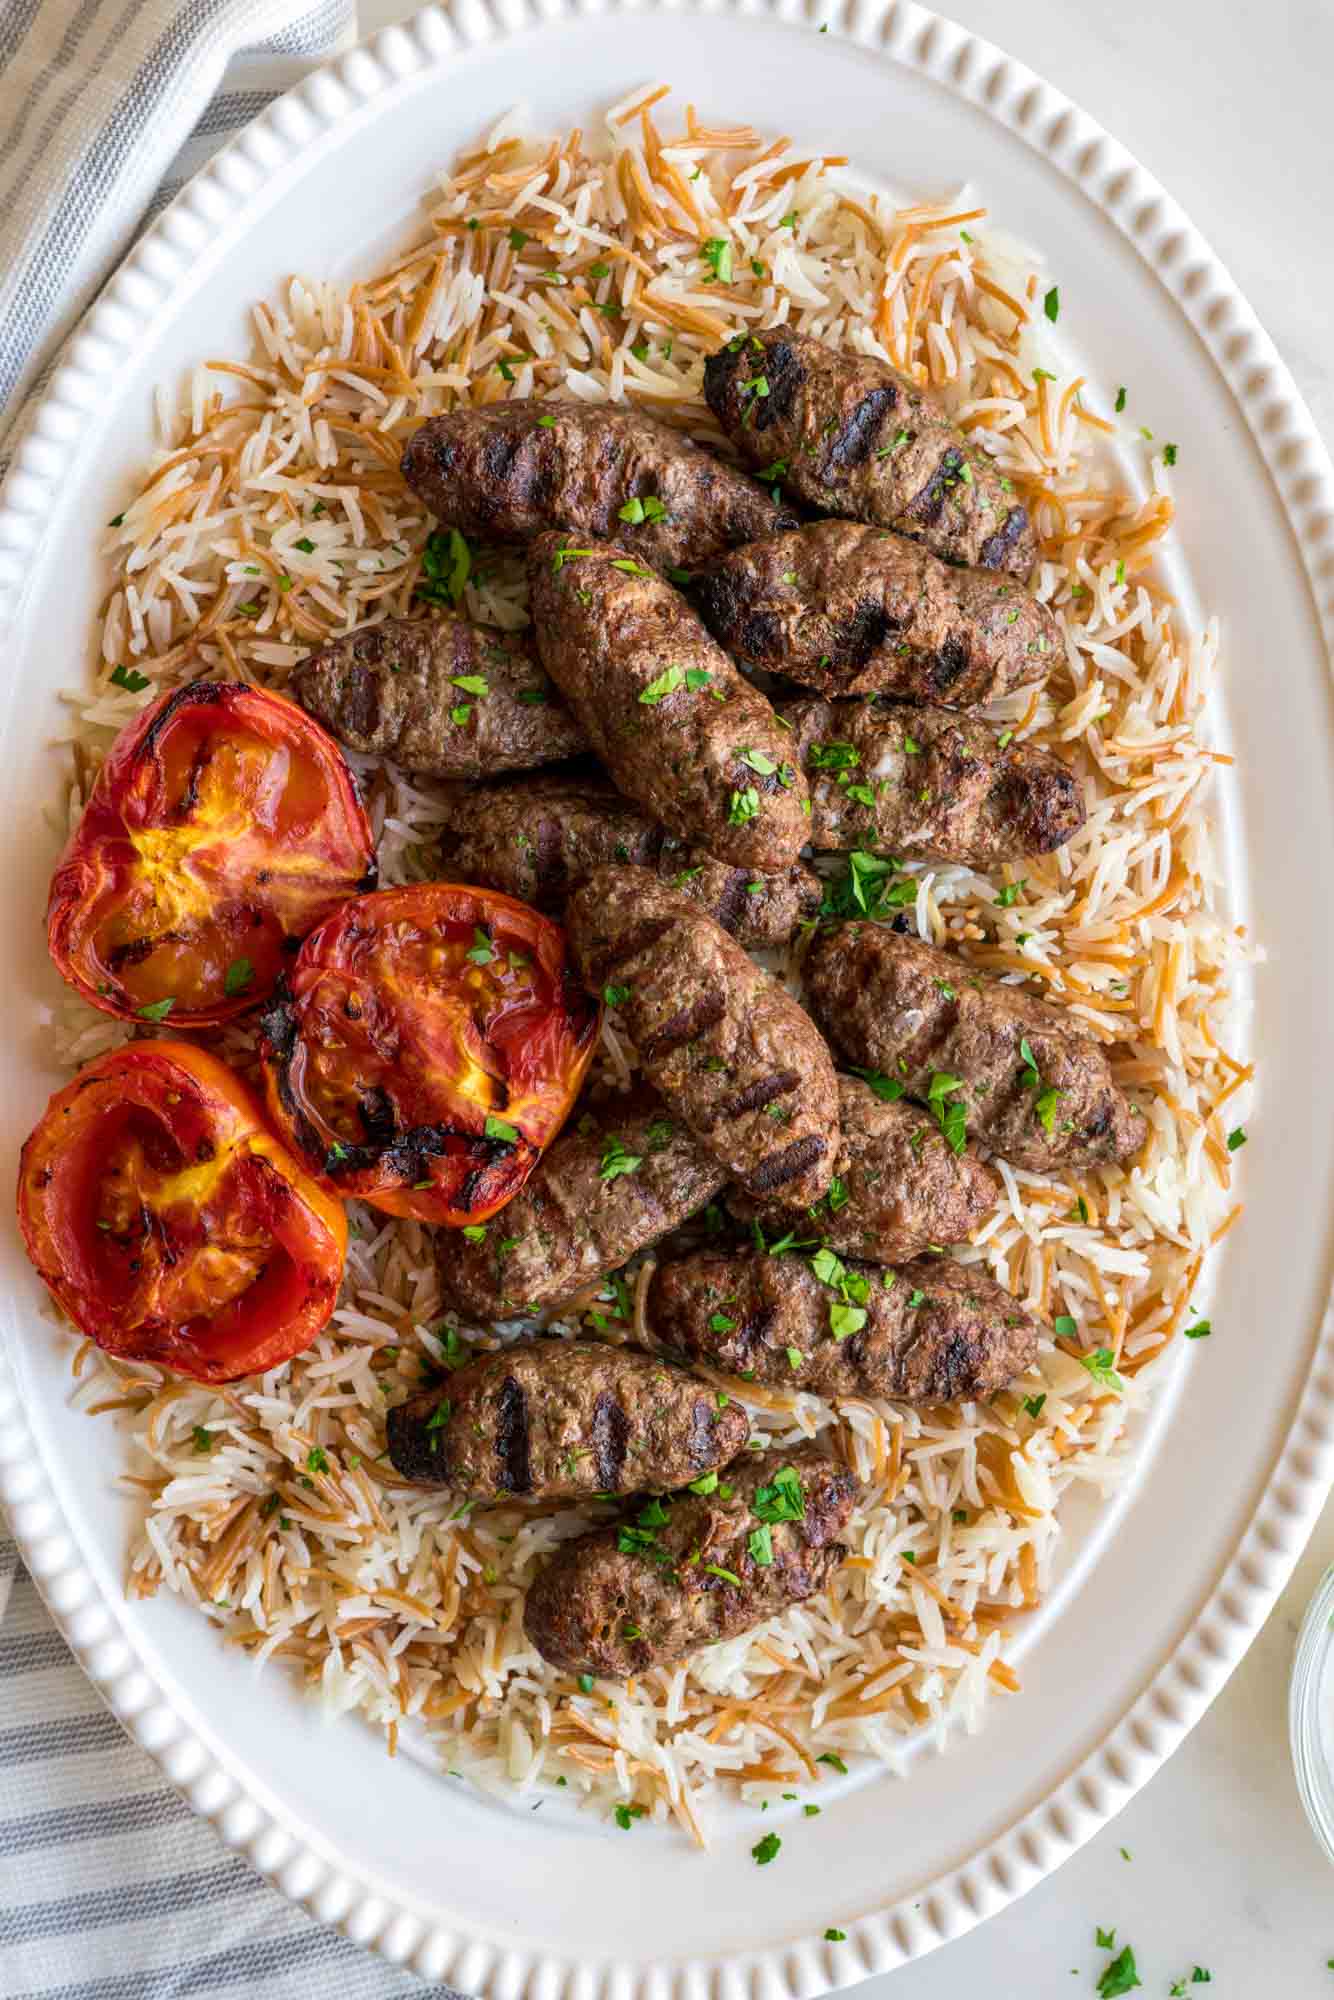 Overhead shot of a large white oval platter with lebanese vermicelli rice, kaftas, and grilled tomatoes.